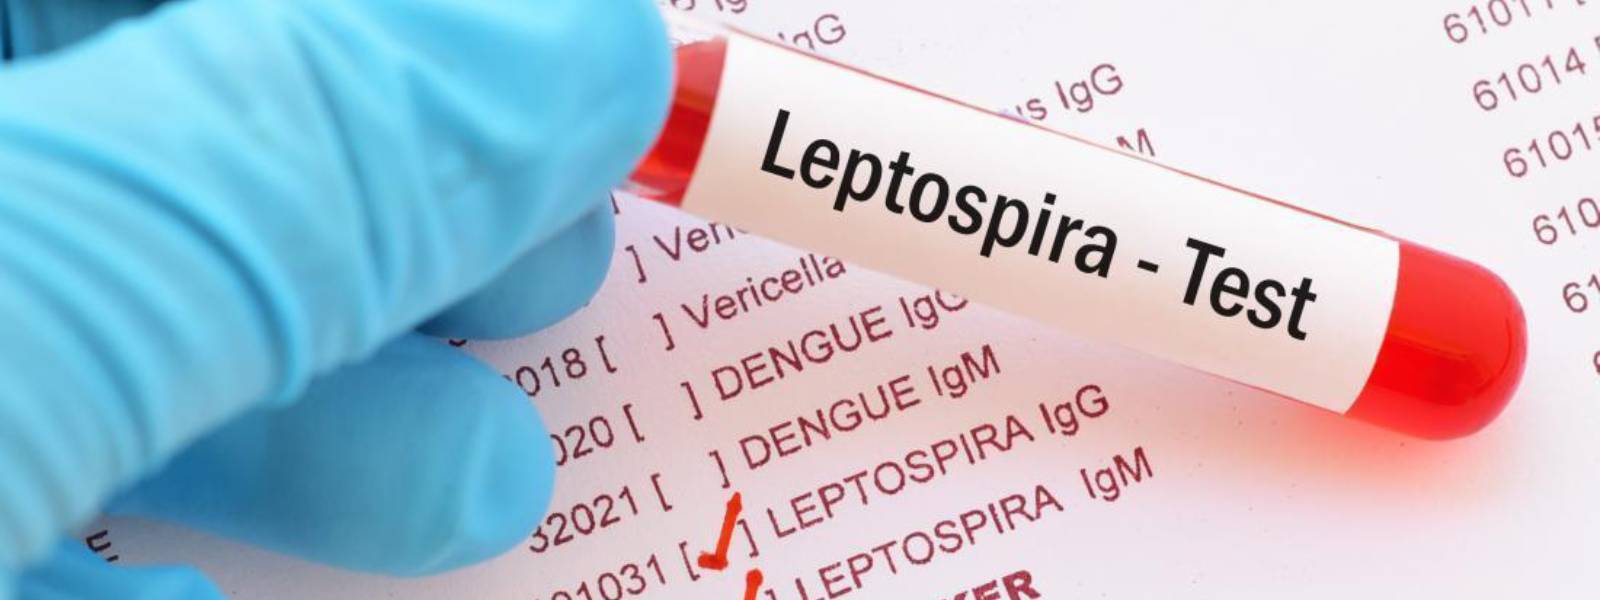 SL urges action against leptospirosis amidst spike